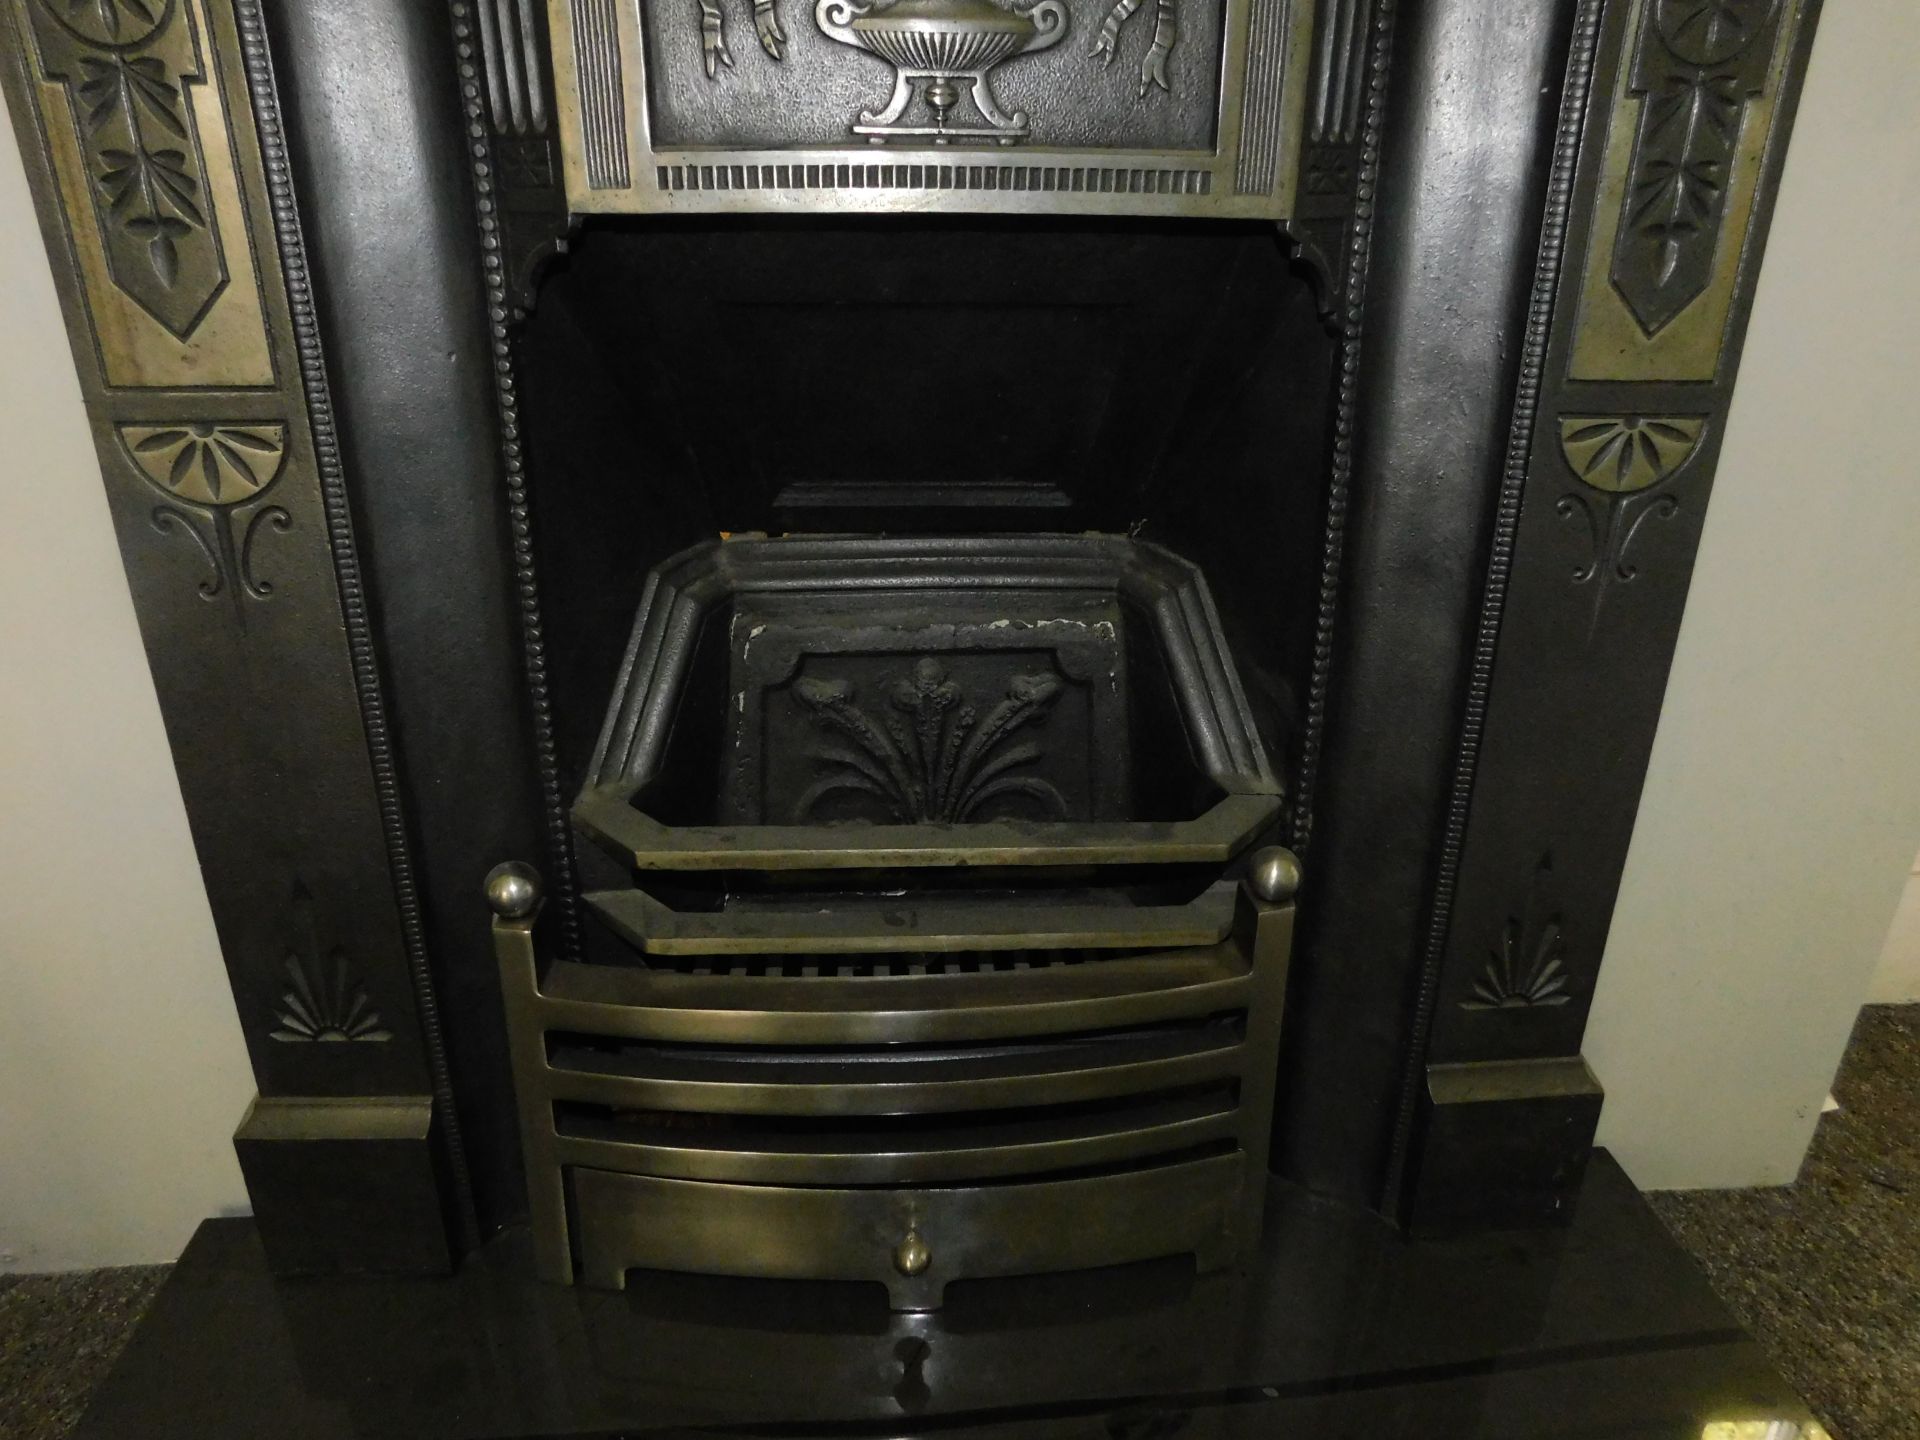 Ex-Display Victorian Cast Iron Fireplace Surround with Granite Hearth & Grate (Where the company’s - Image 2 of 3